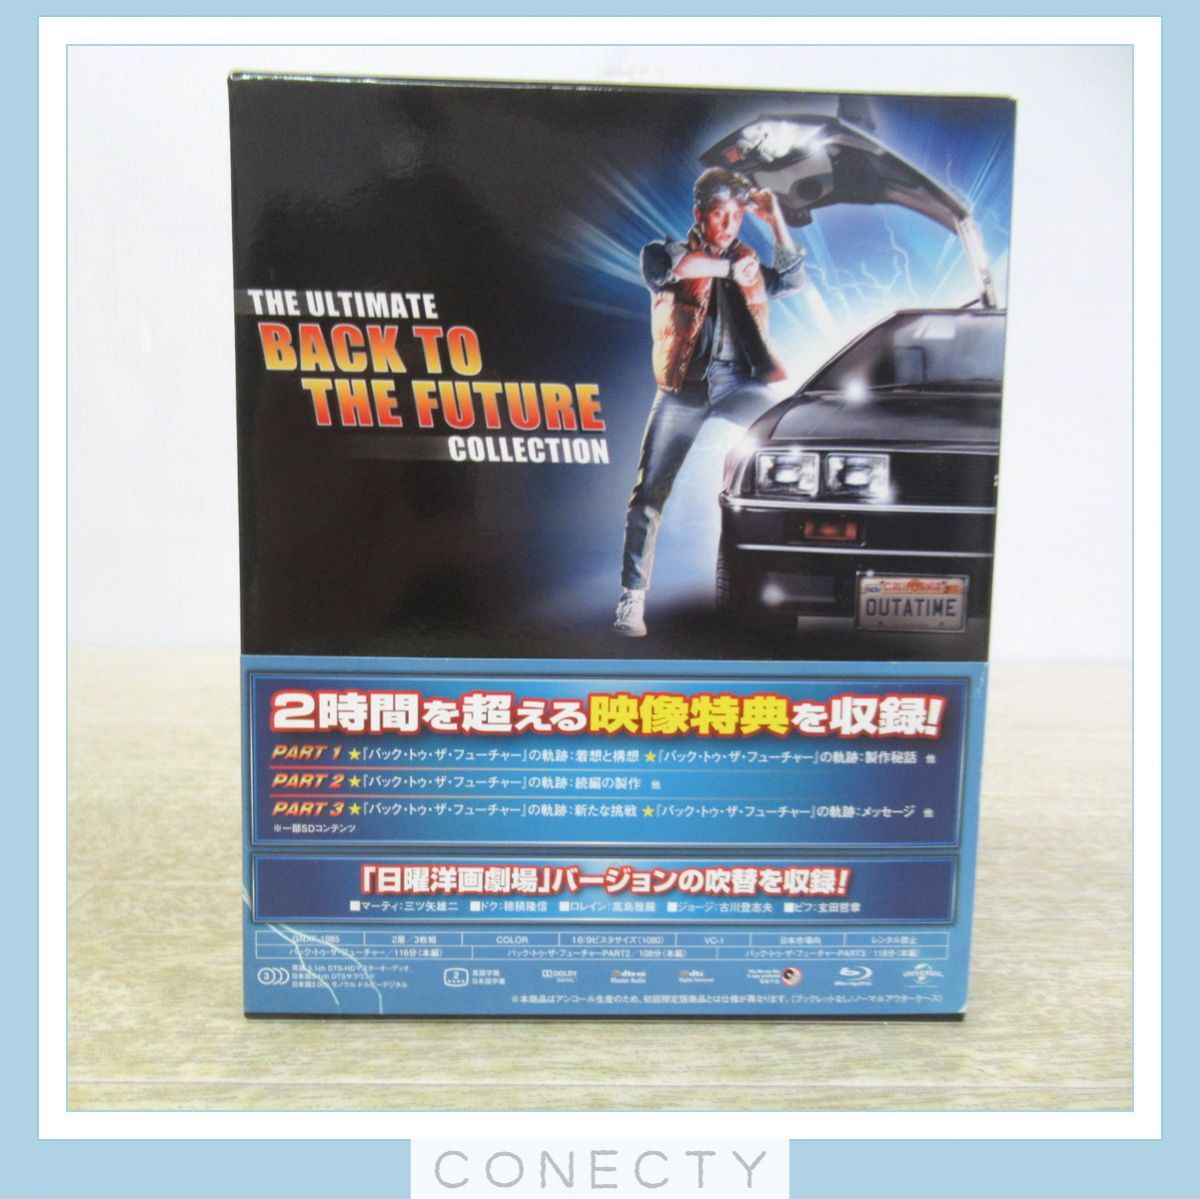 BACK TO THE FUTURE TRILOGY 25th アニバーサリー Blu-ray BOX 3枚組 バック・トゥー・ザ・フューチャー【T3【SKの画像2